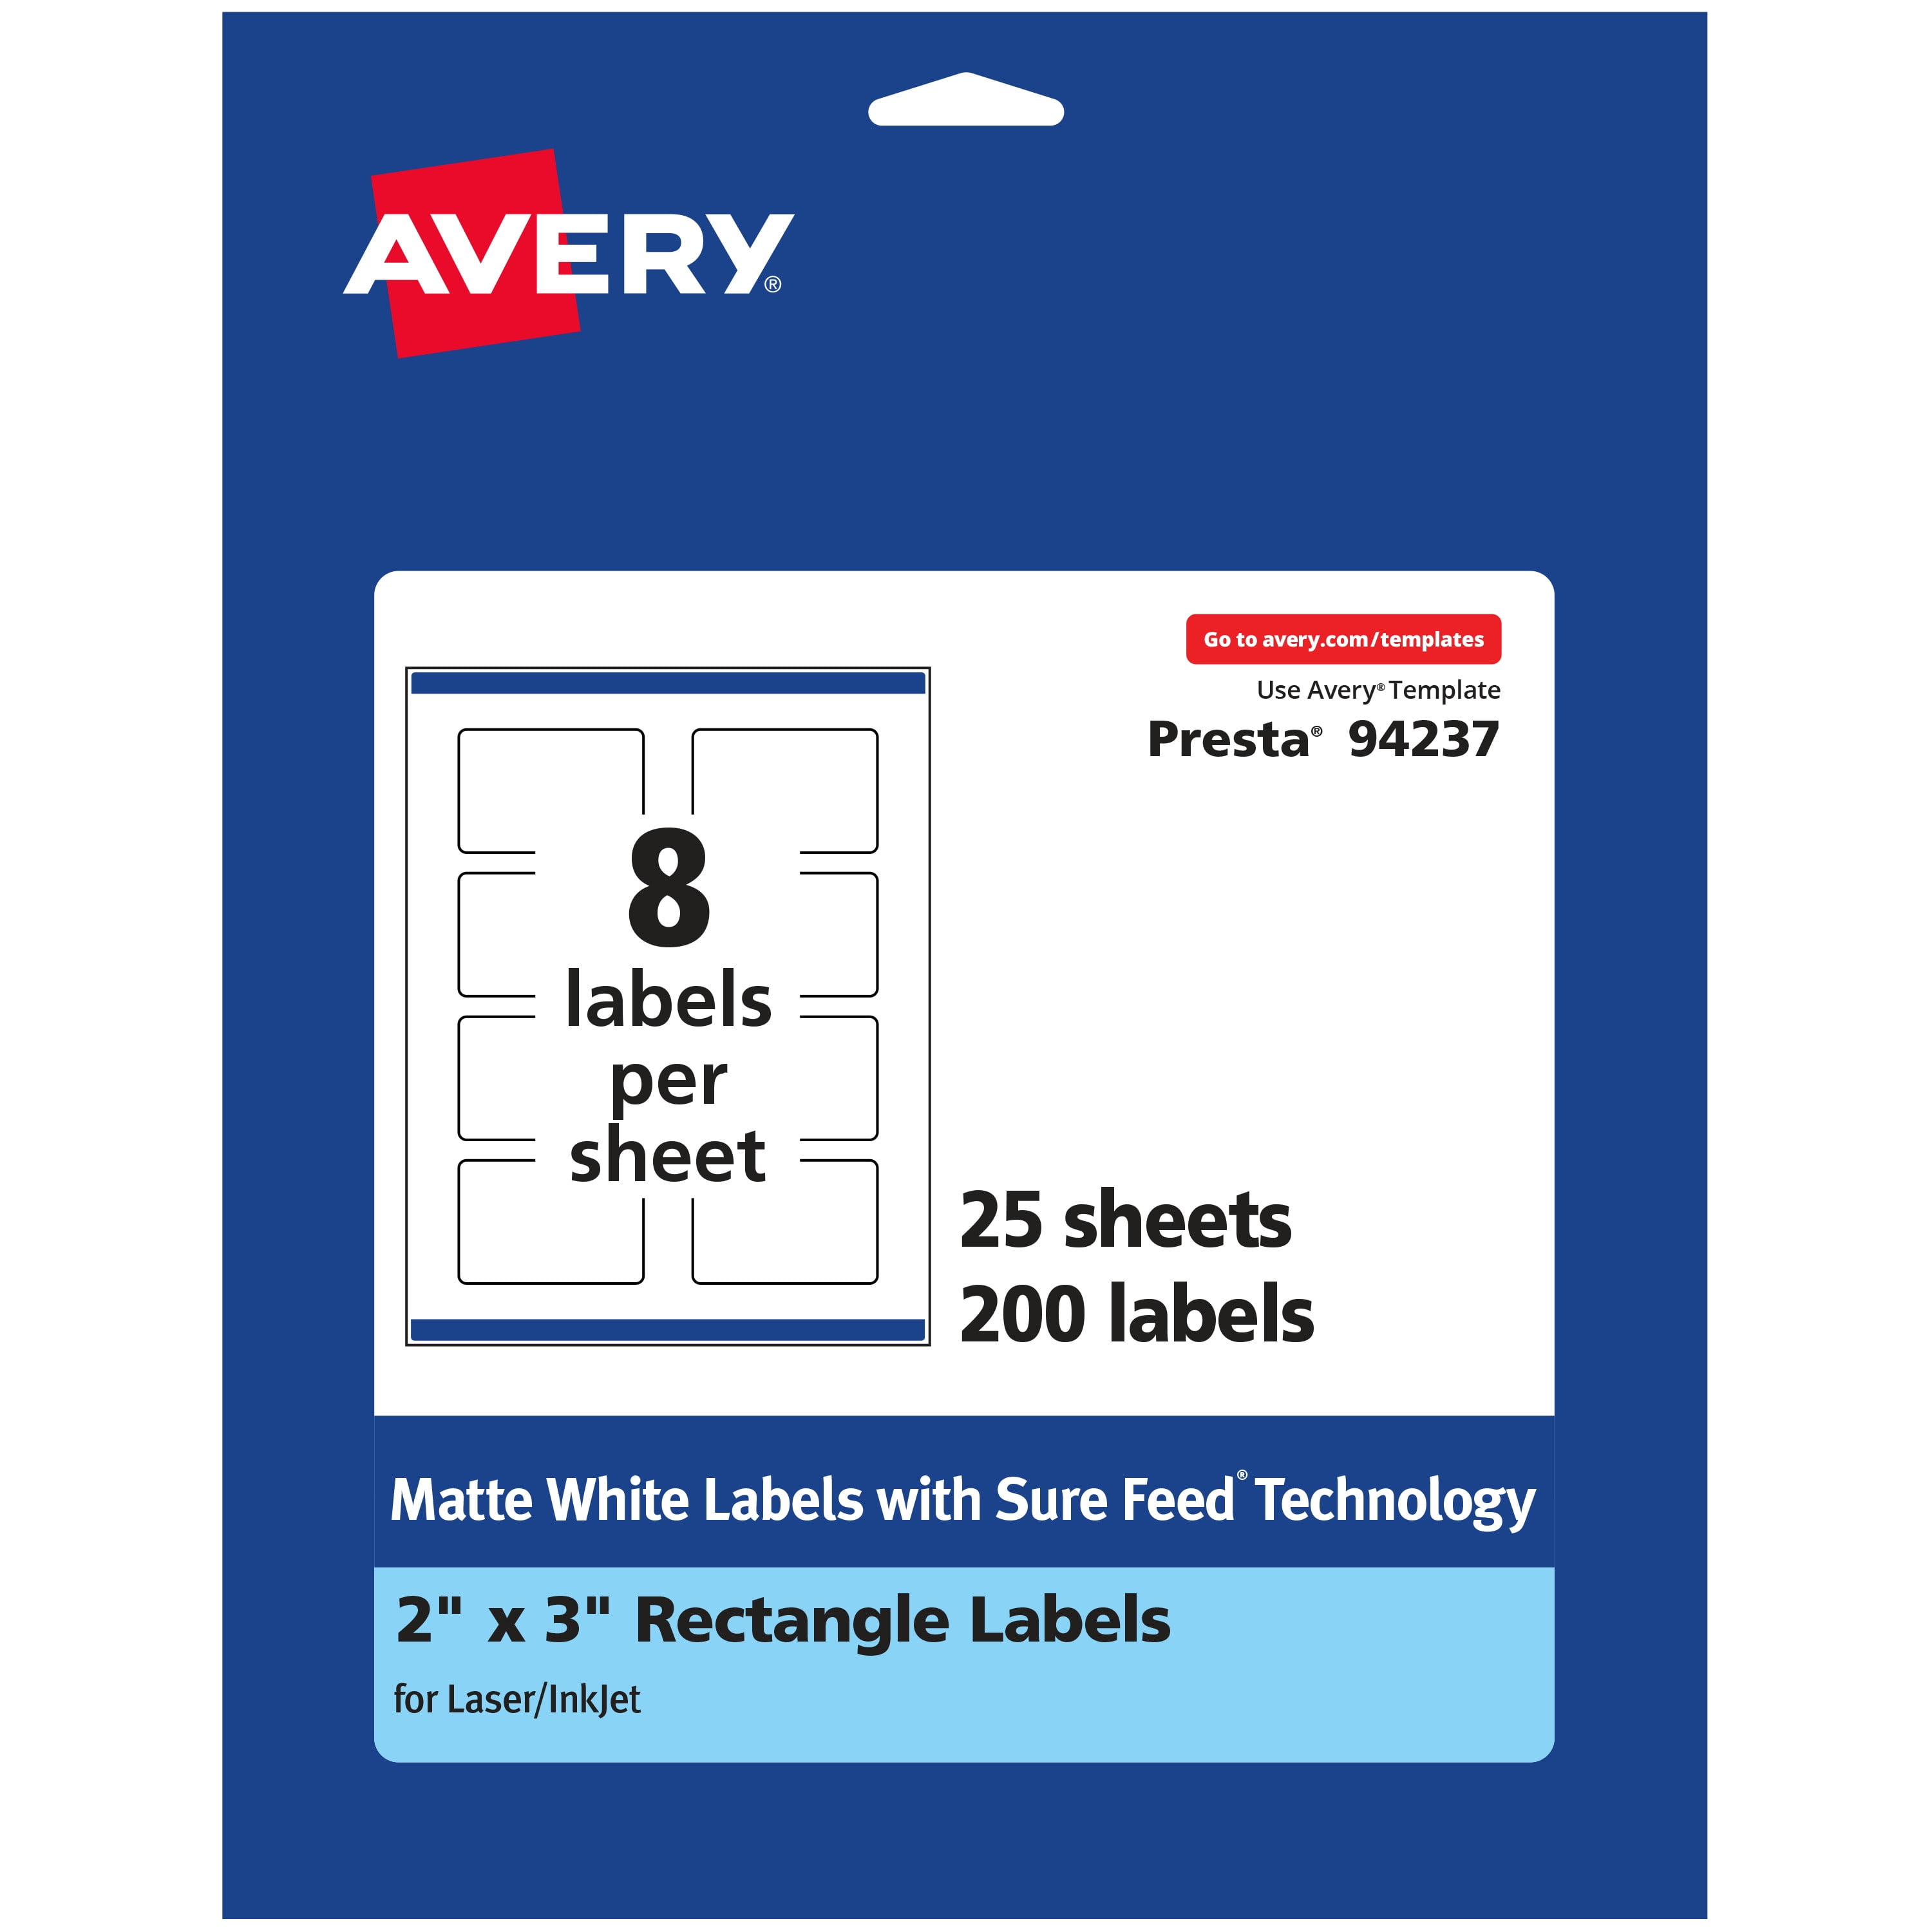 Location & Condition Sheet of 21 Price BRAND NEW 1" x 2" Removable Stickers 